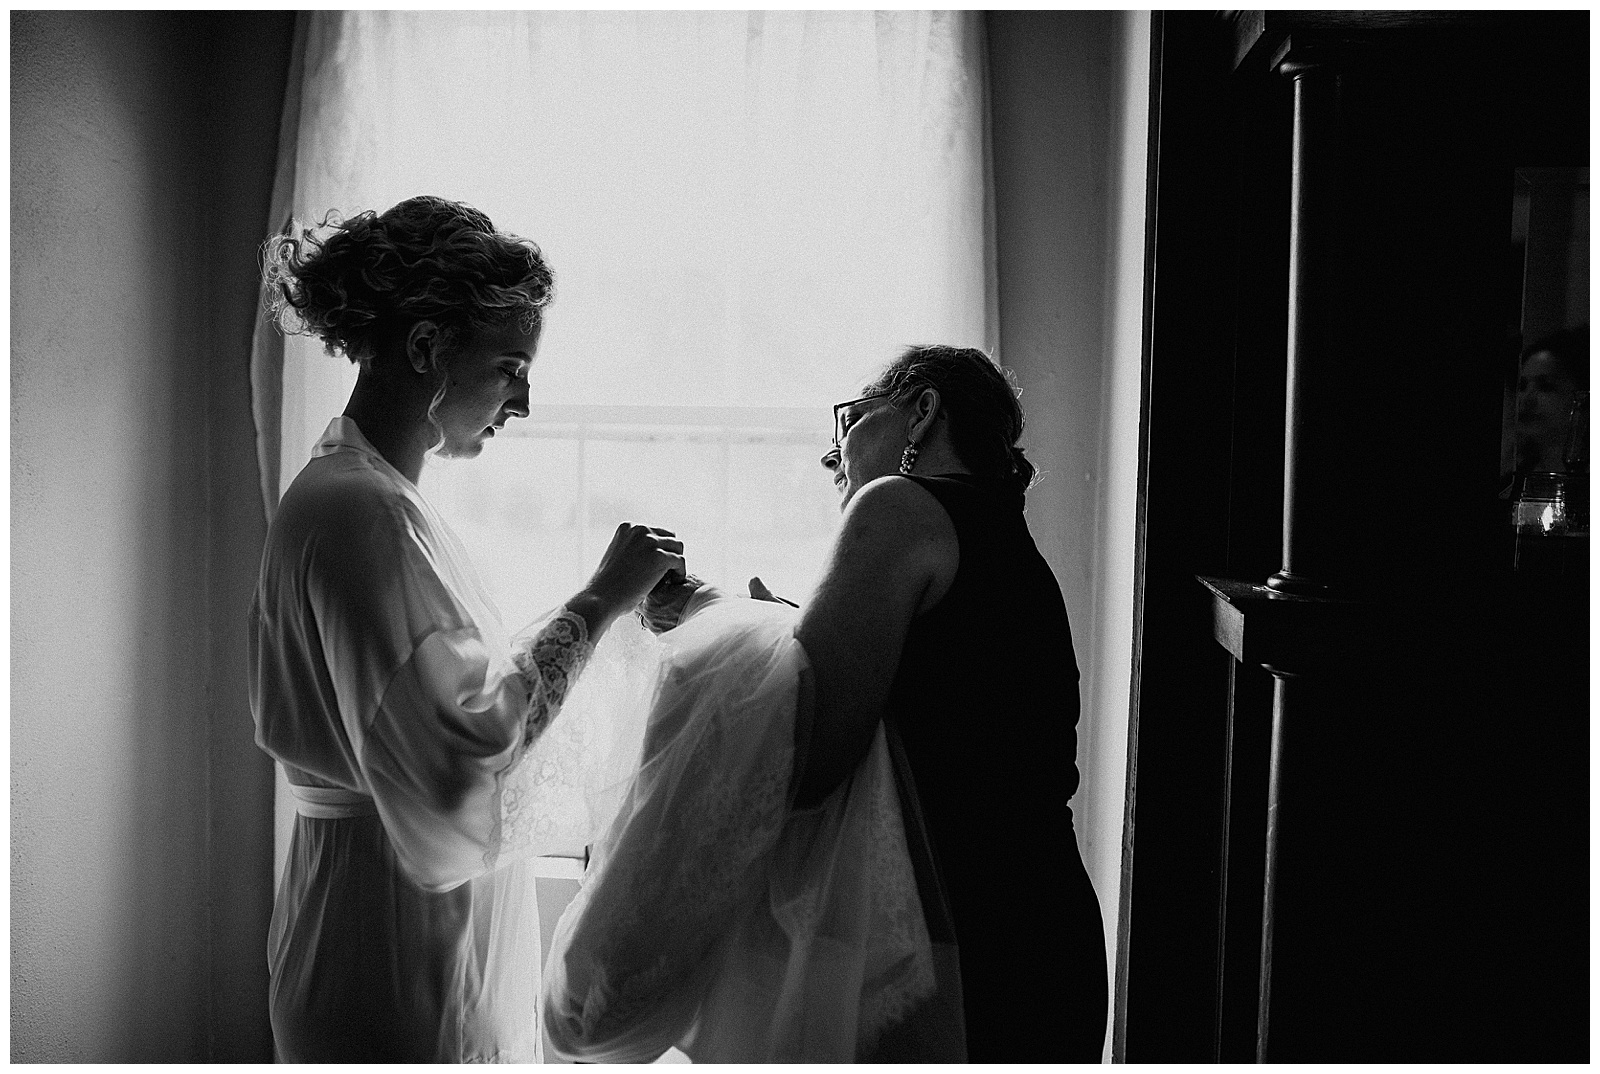 intimate wedding details, intimate wedding dress, bride getting ready, mother of the bride, emotional storytelling